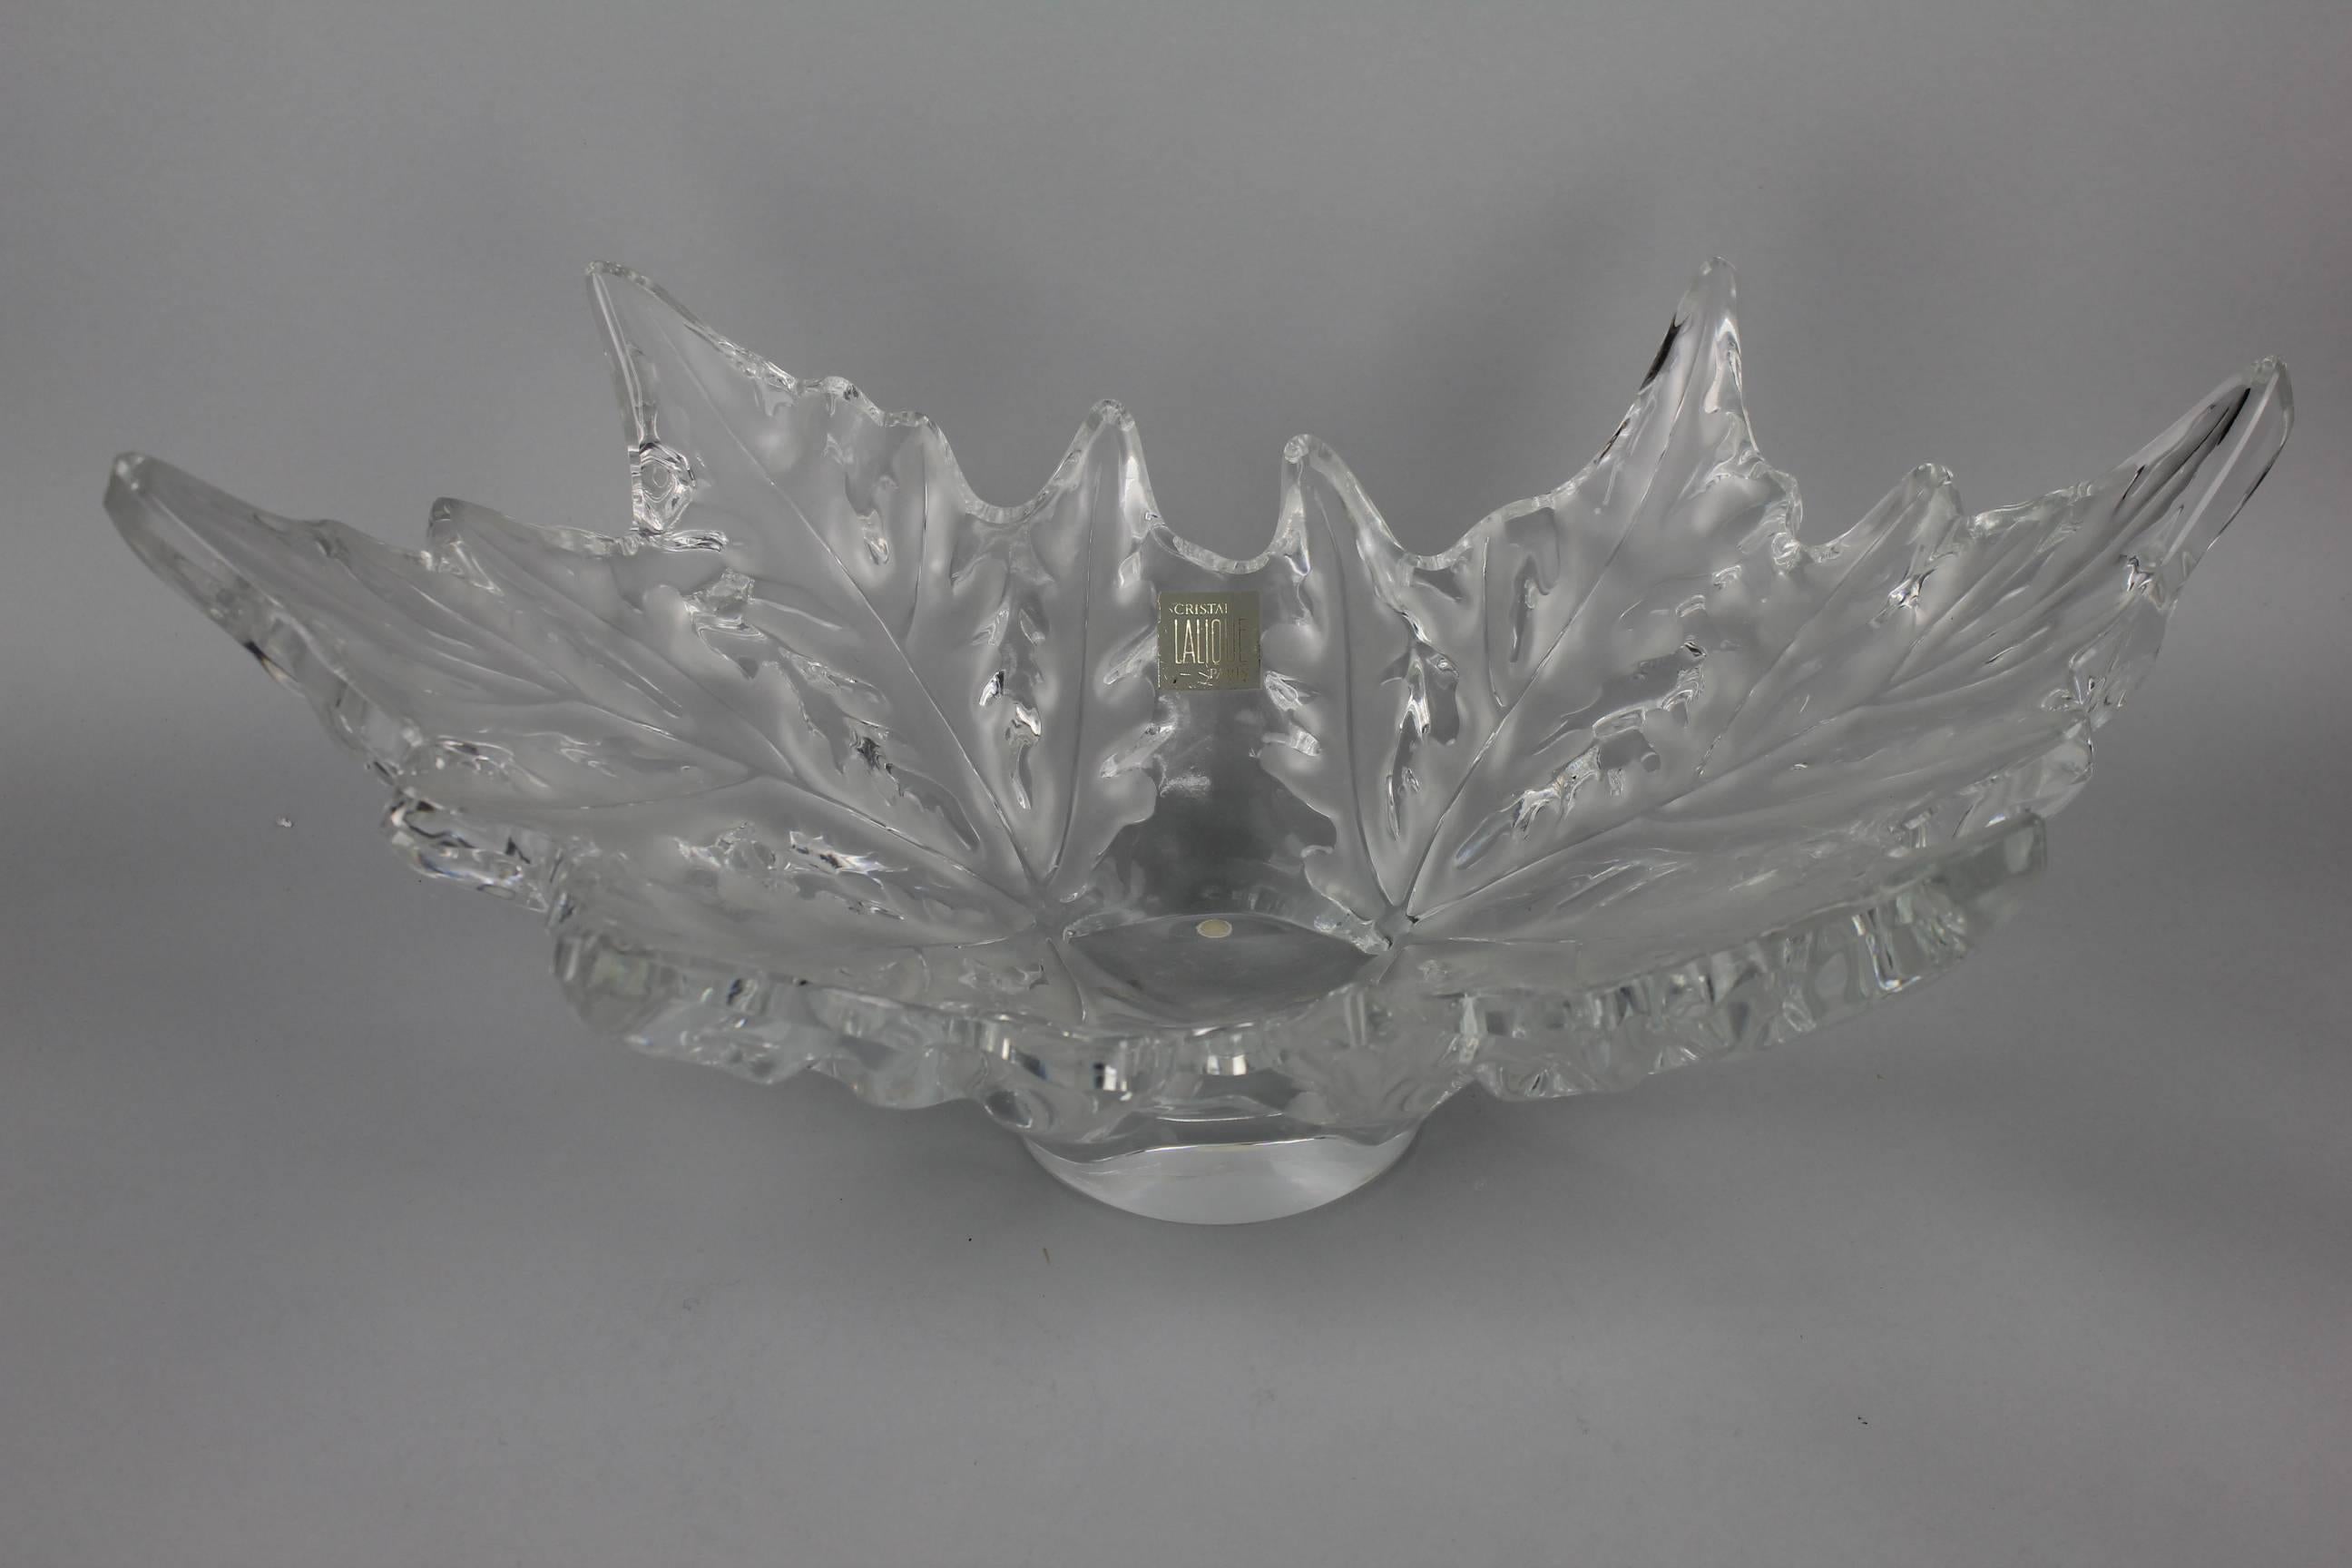 The oval bowl modelled as two sycamore leaves. Lalique no. 11216. Engraved Lalique, France.
Made after 1946. Very good condition.